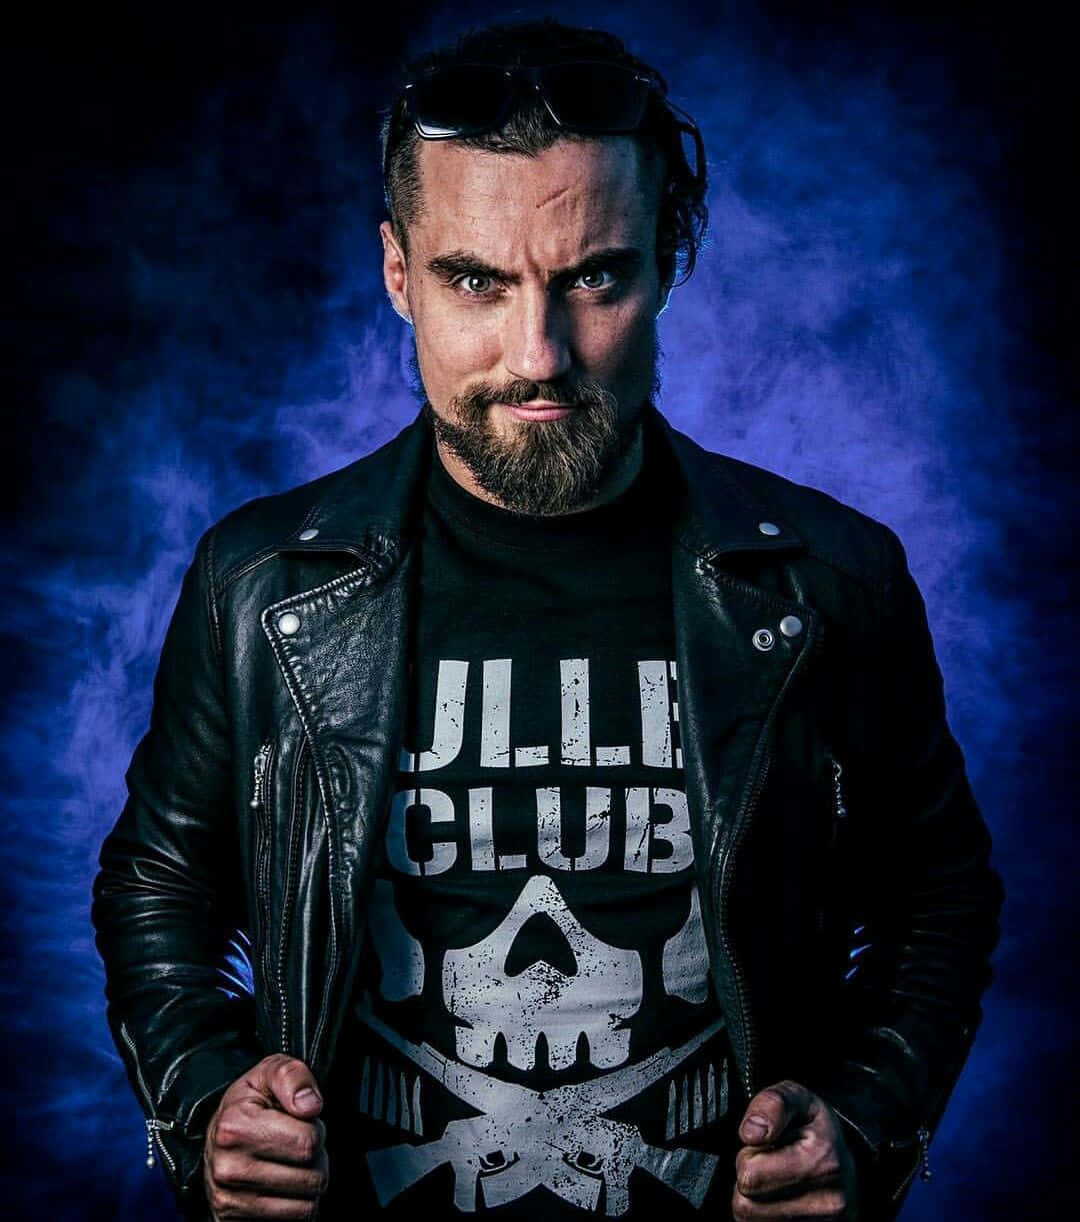 Download English Professional Wrestler Marty Scurll Bullet Club Wallpaper |  